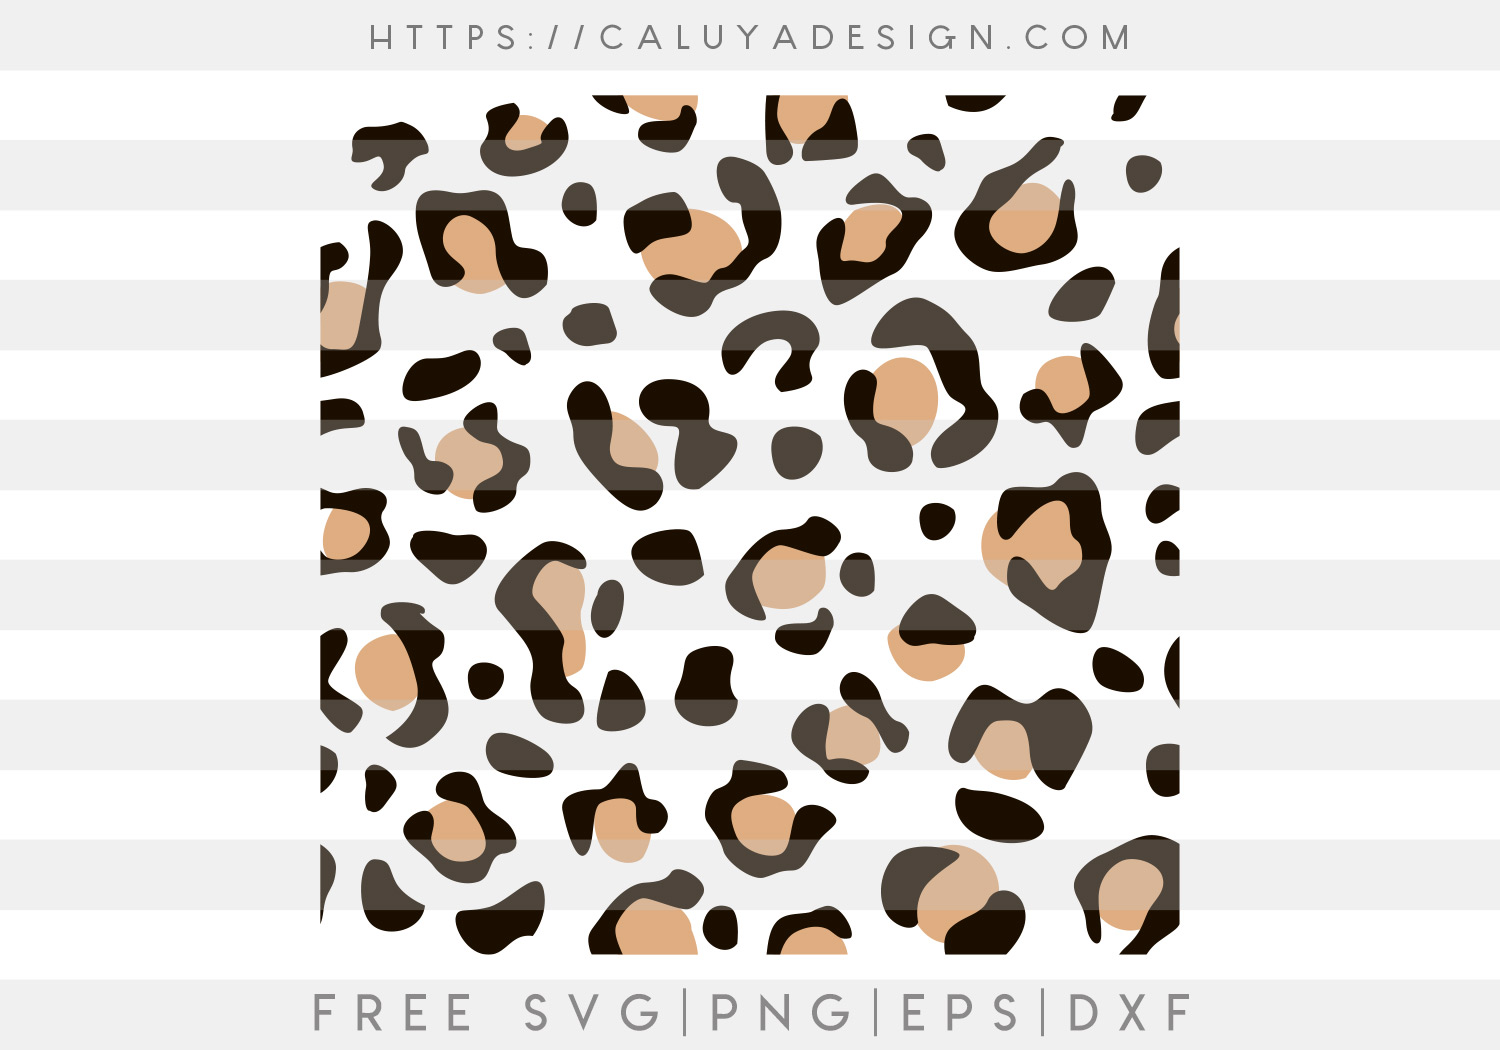 Free Colored Leopard SVG, PNG, EPS & DXF by Caluya Design